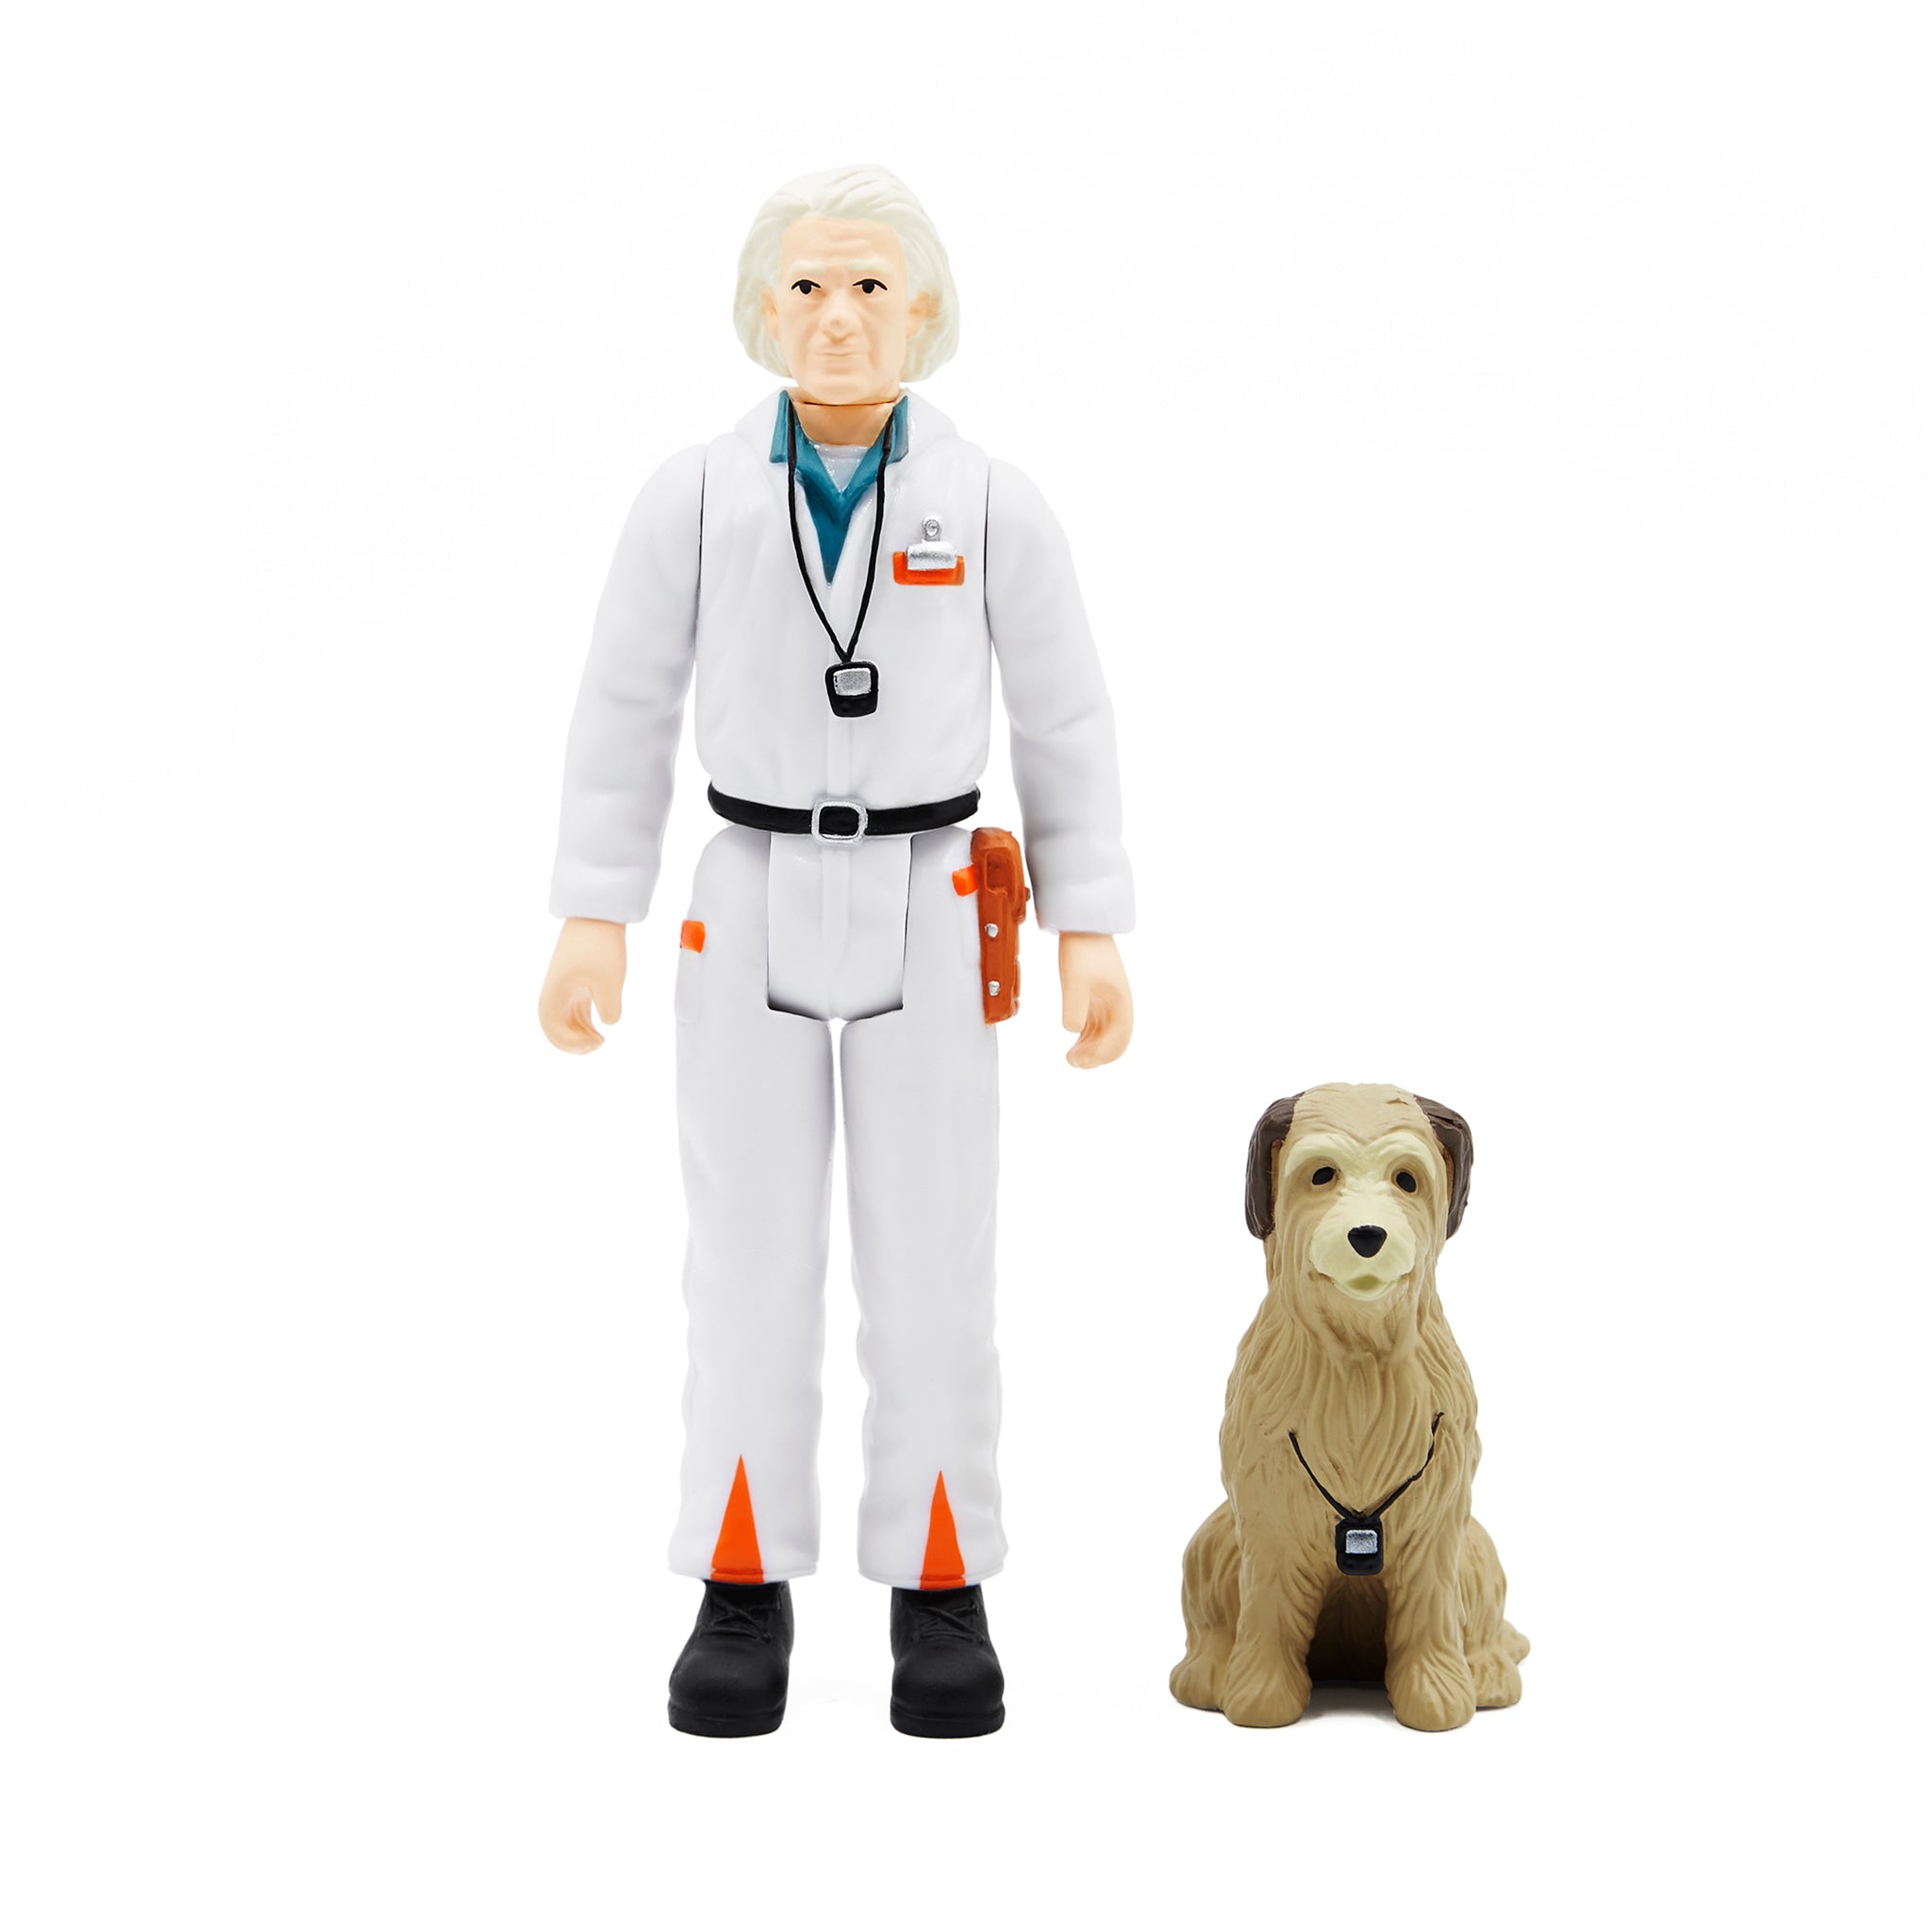 Back to the Future ReAction Figure Wave 2 - Doc Brown